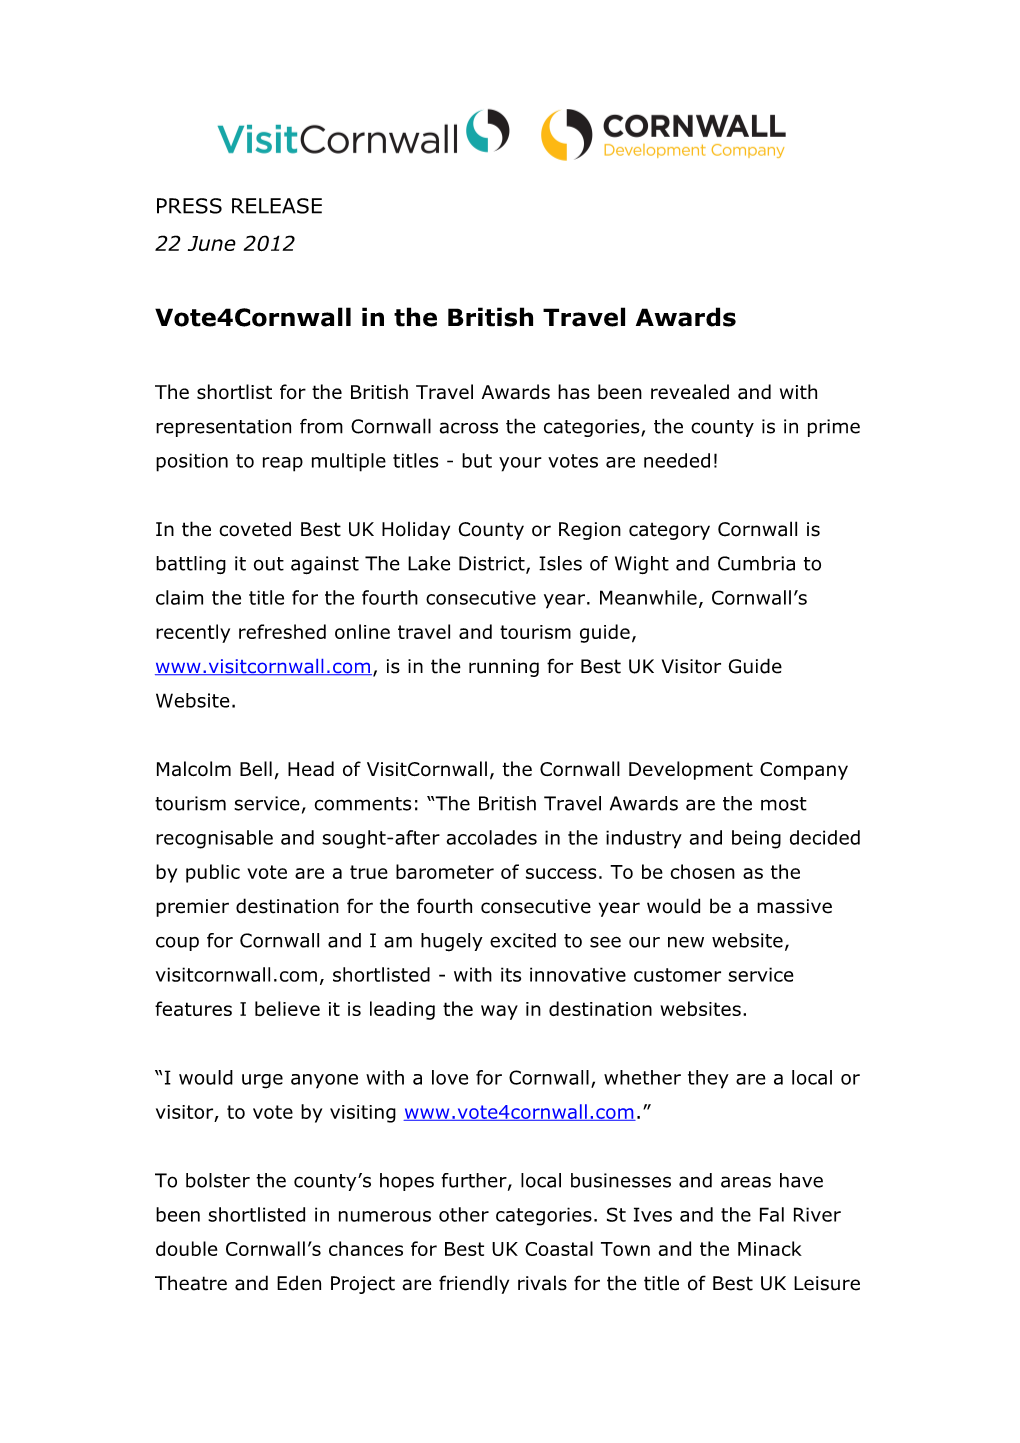 Vote4cornwall in the British Travel Awards